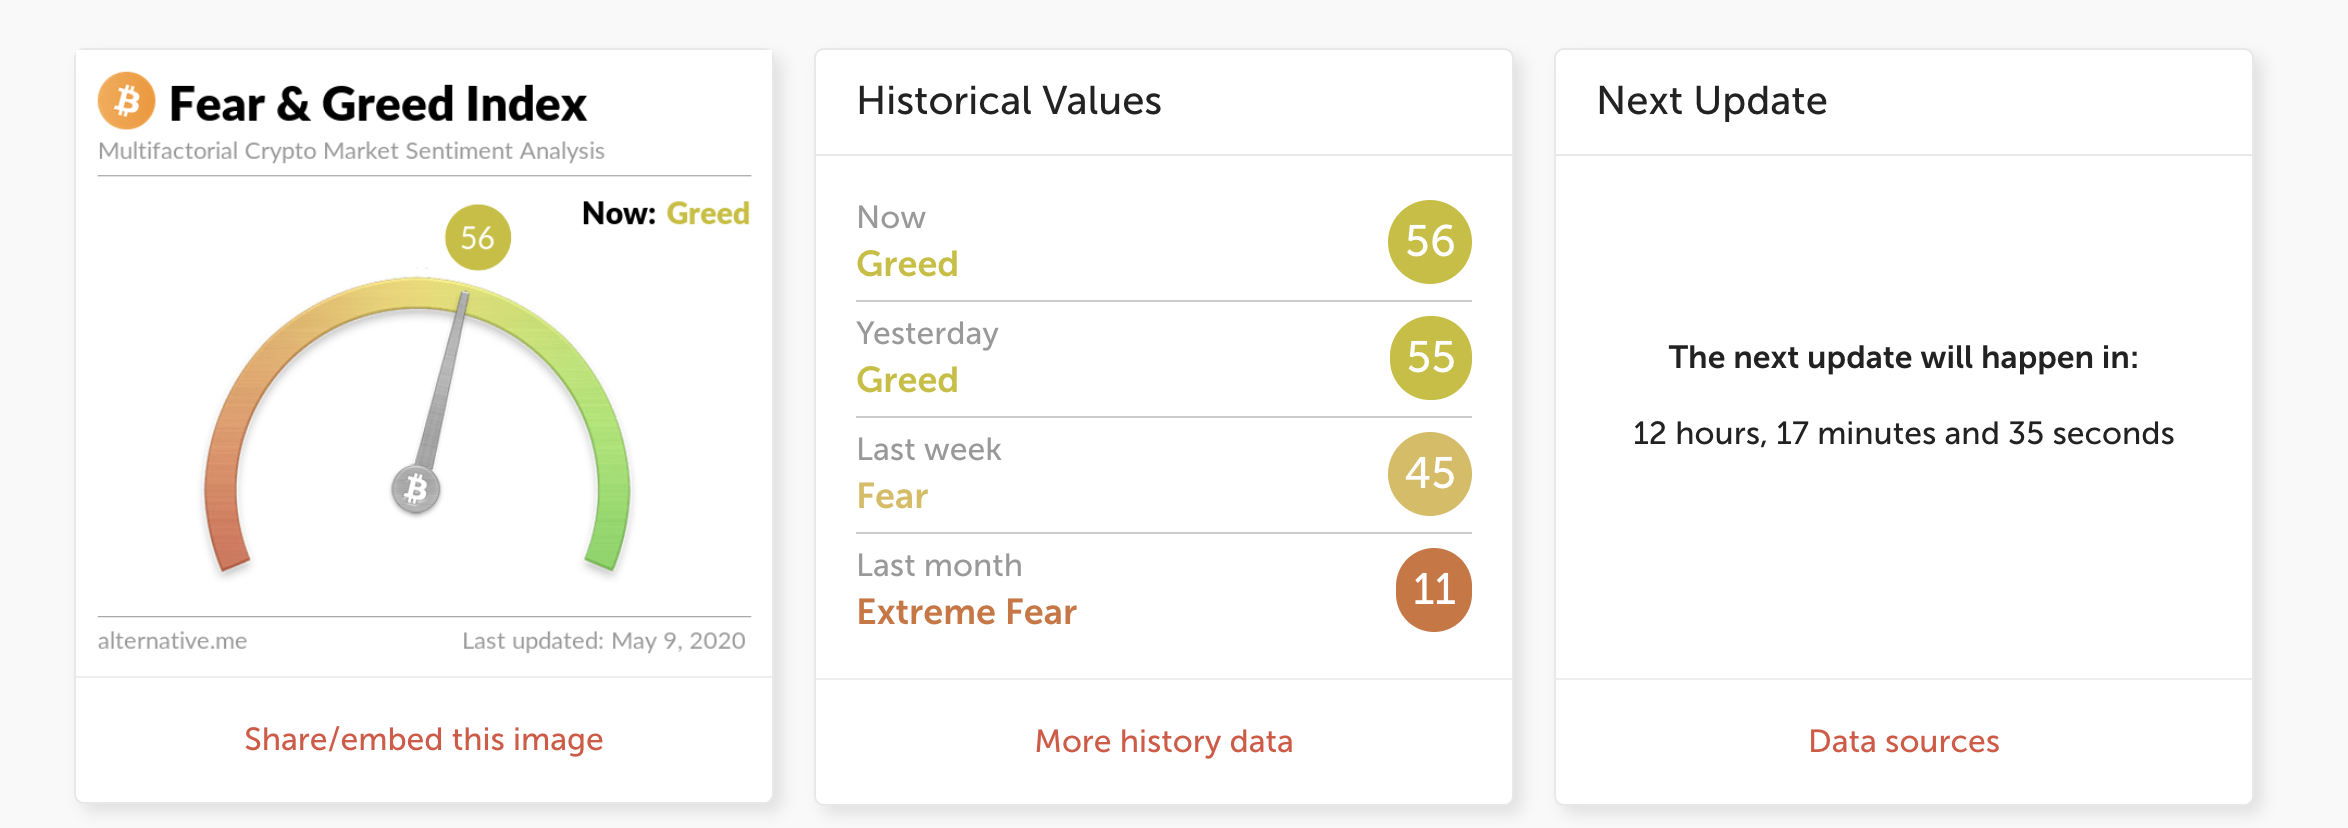 fear and greed index crypto today